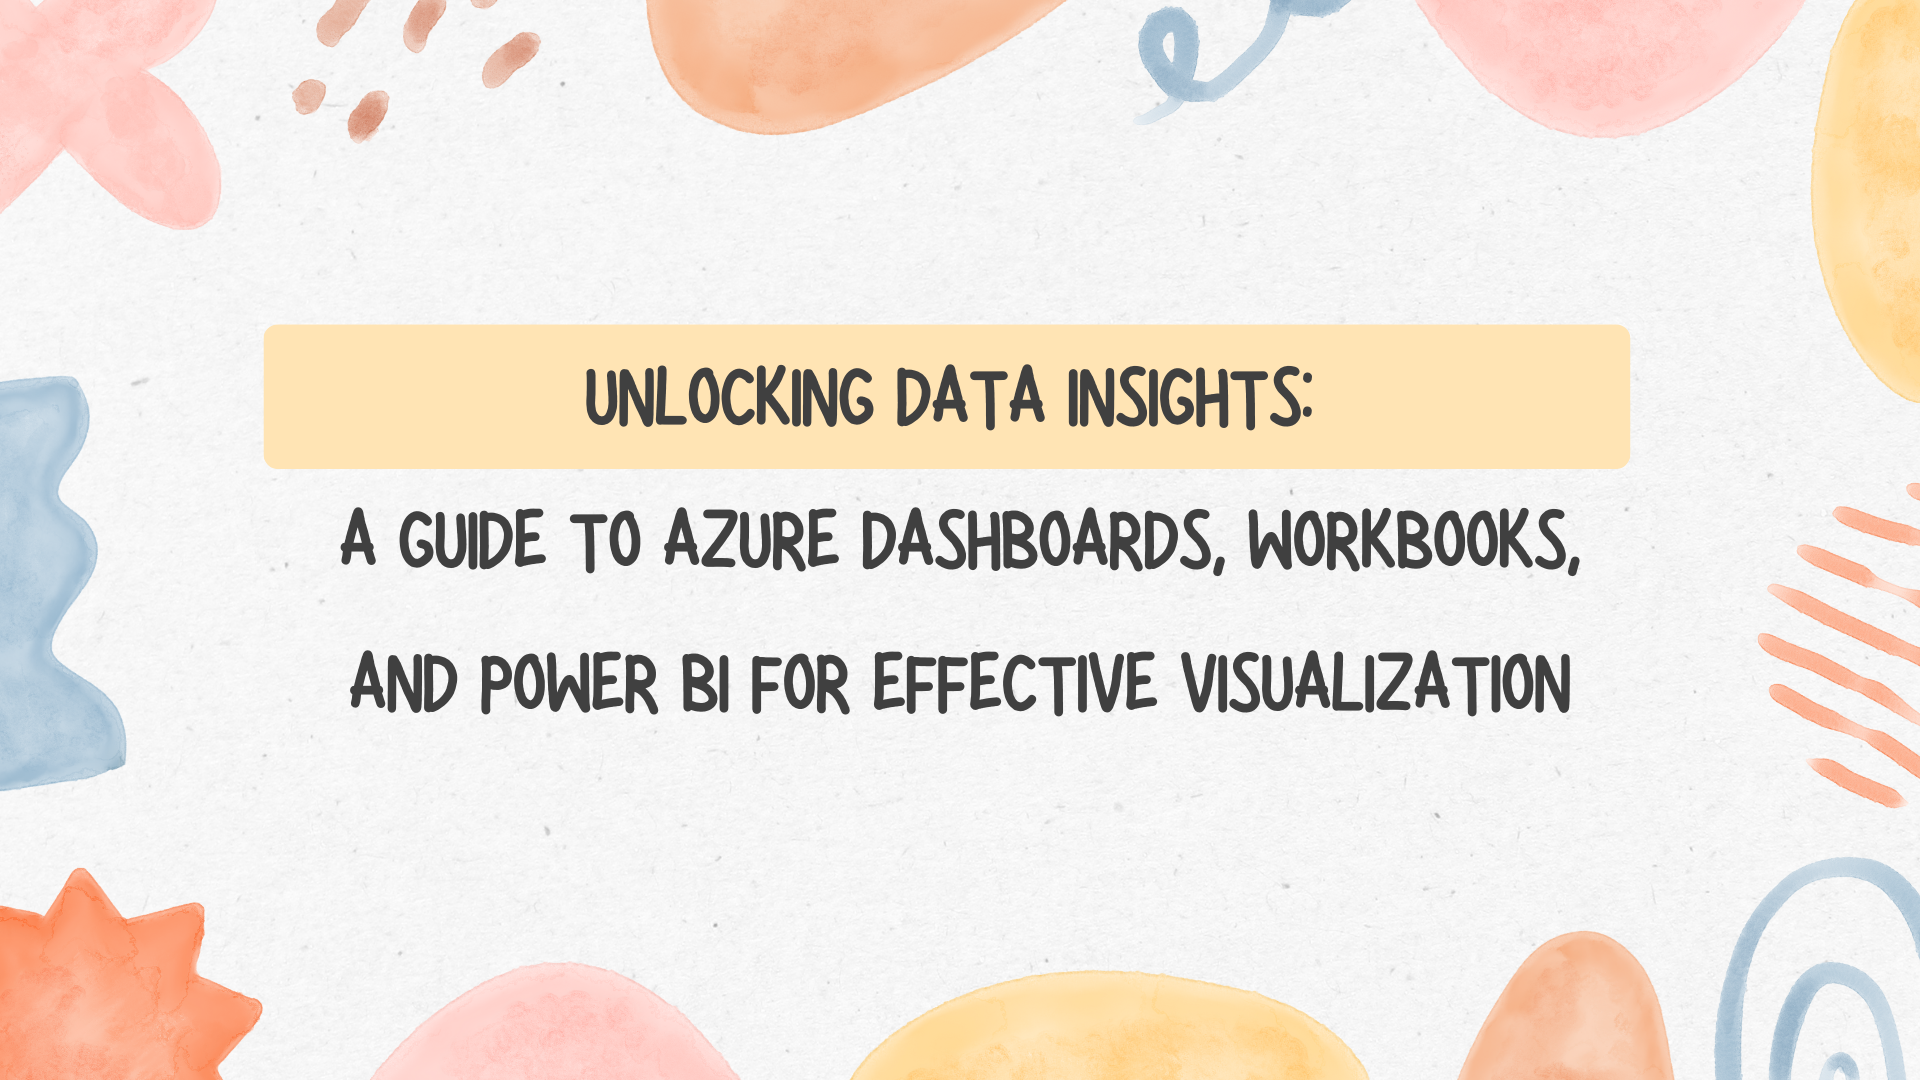 Unlocking Data Insights: A Guide to Azure Dashboards, Workbooks, and Power BI for Effective Visualization